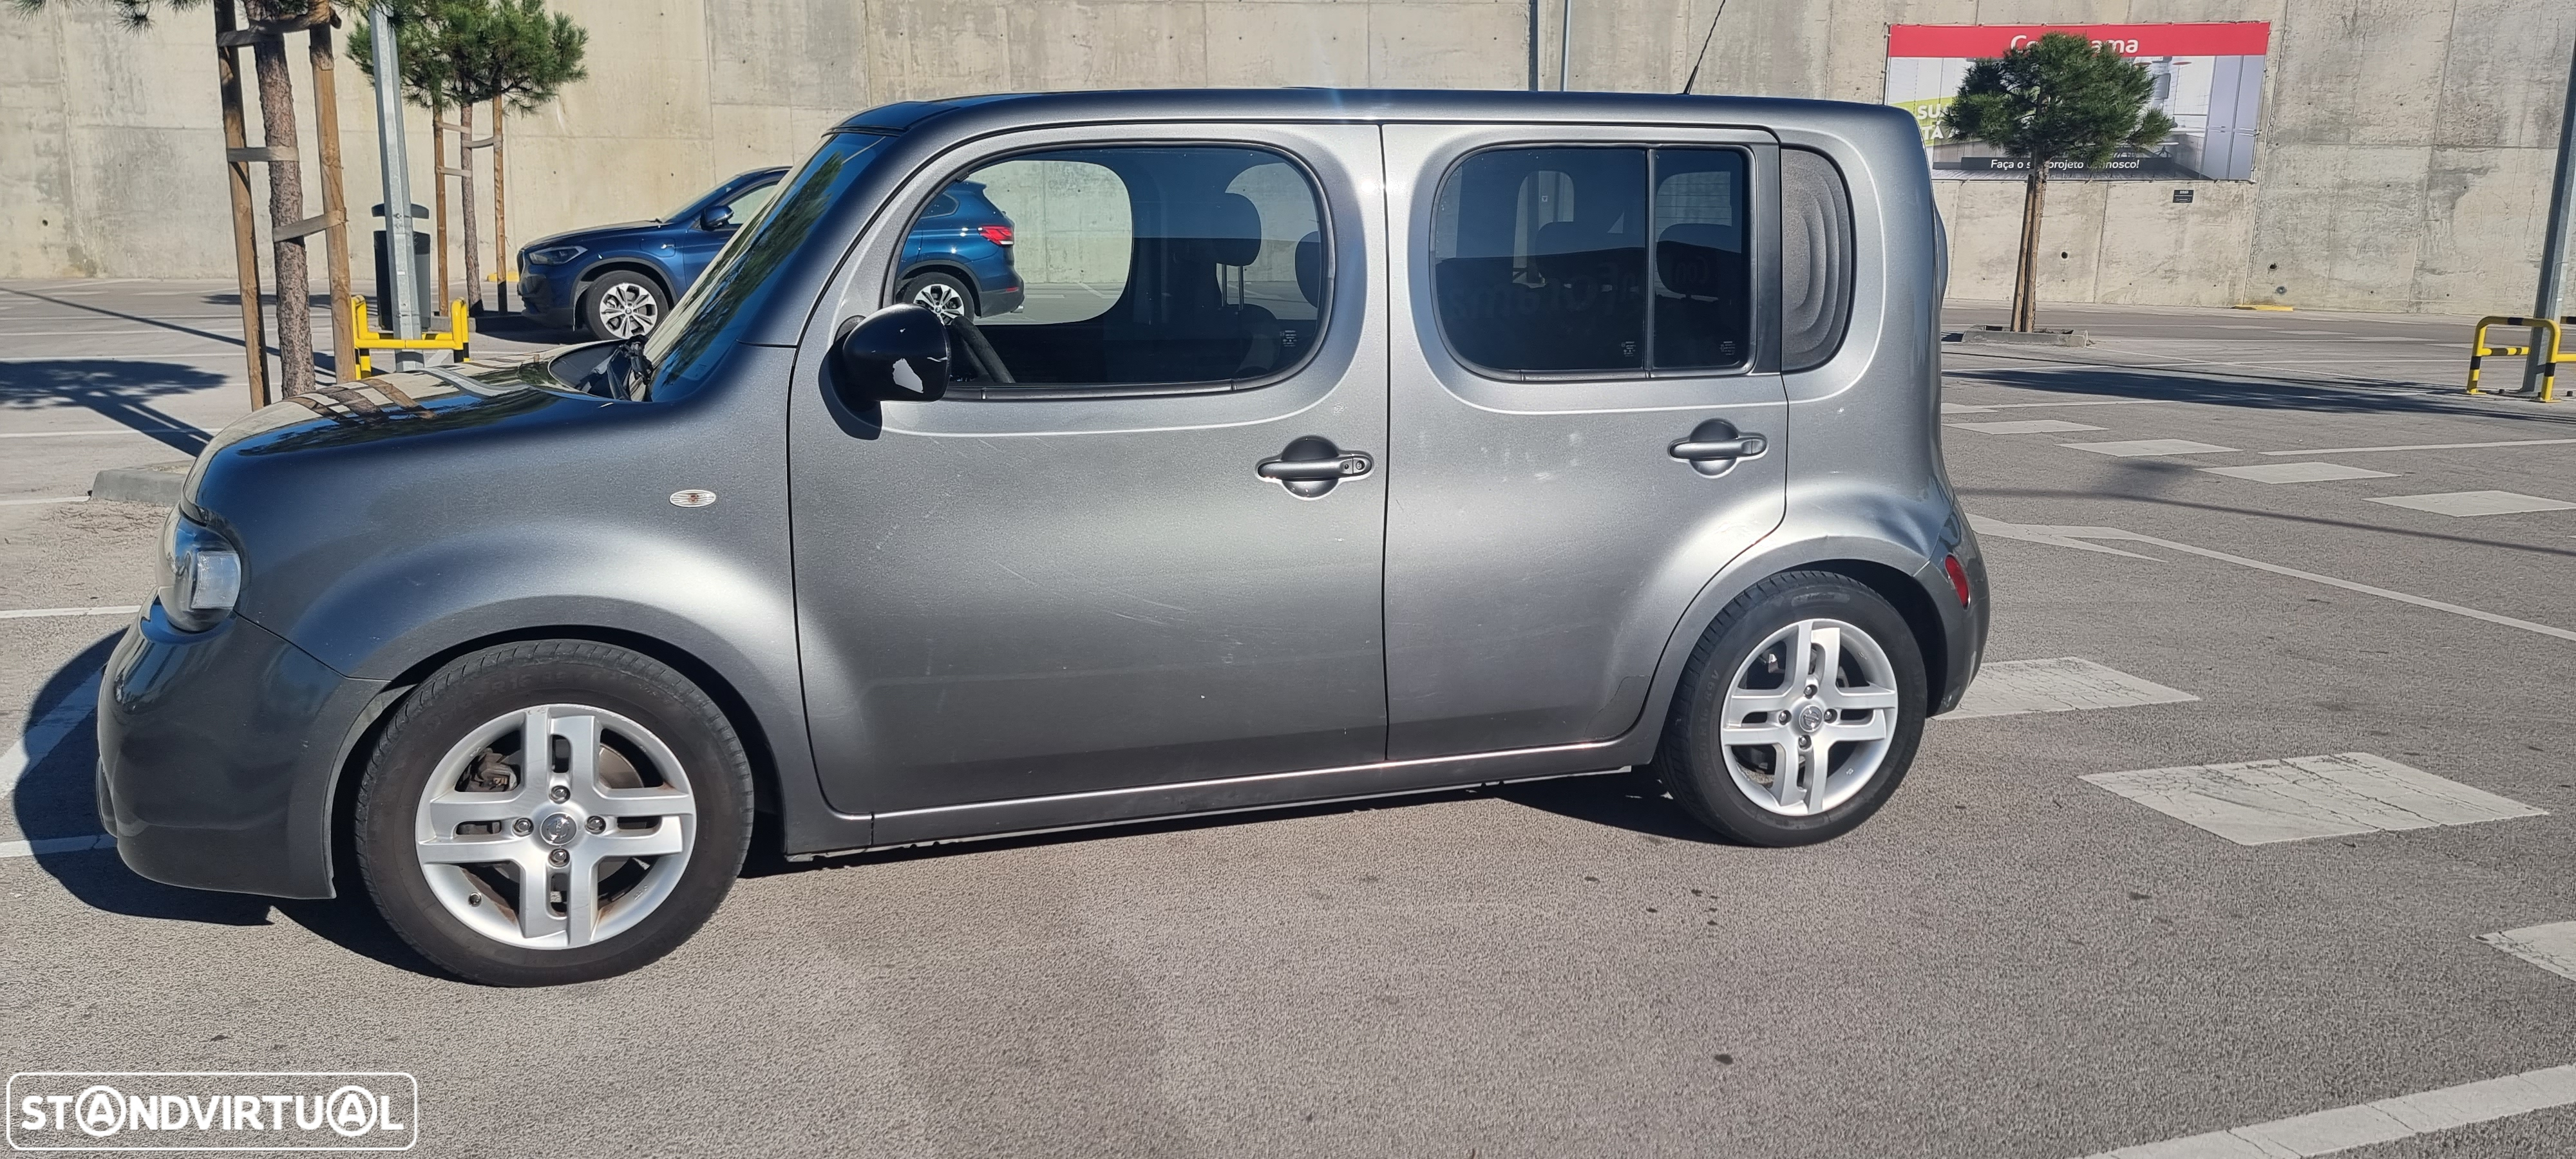 Nissan Cube 1.5 dCi - 2